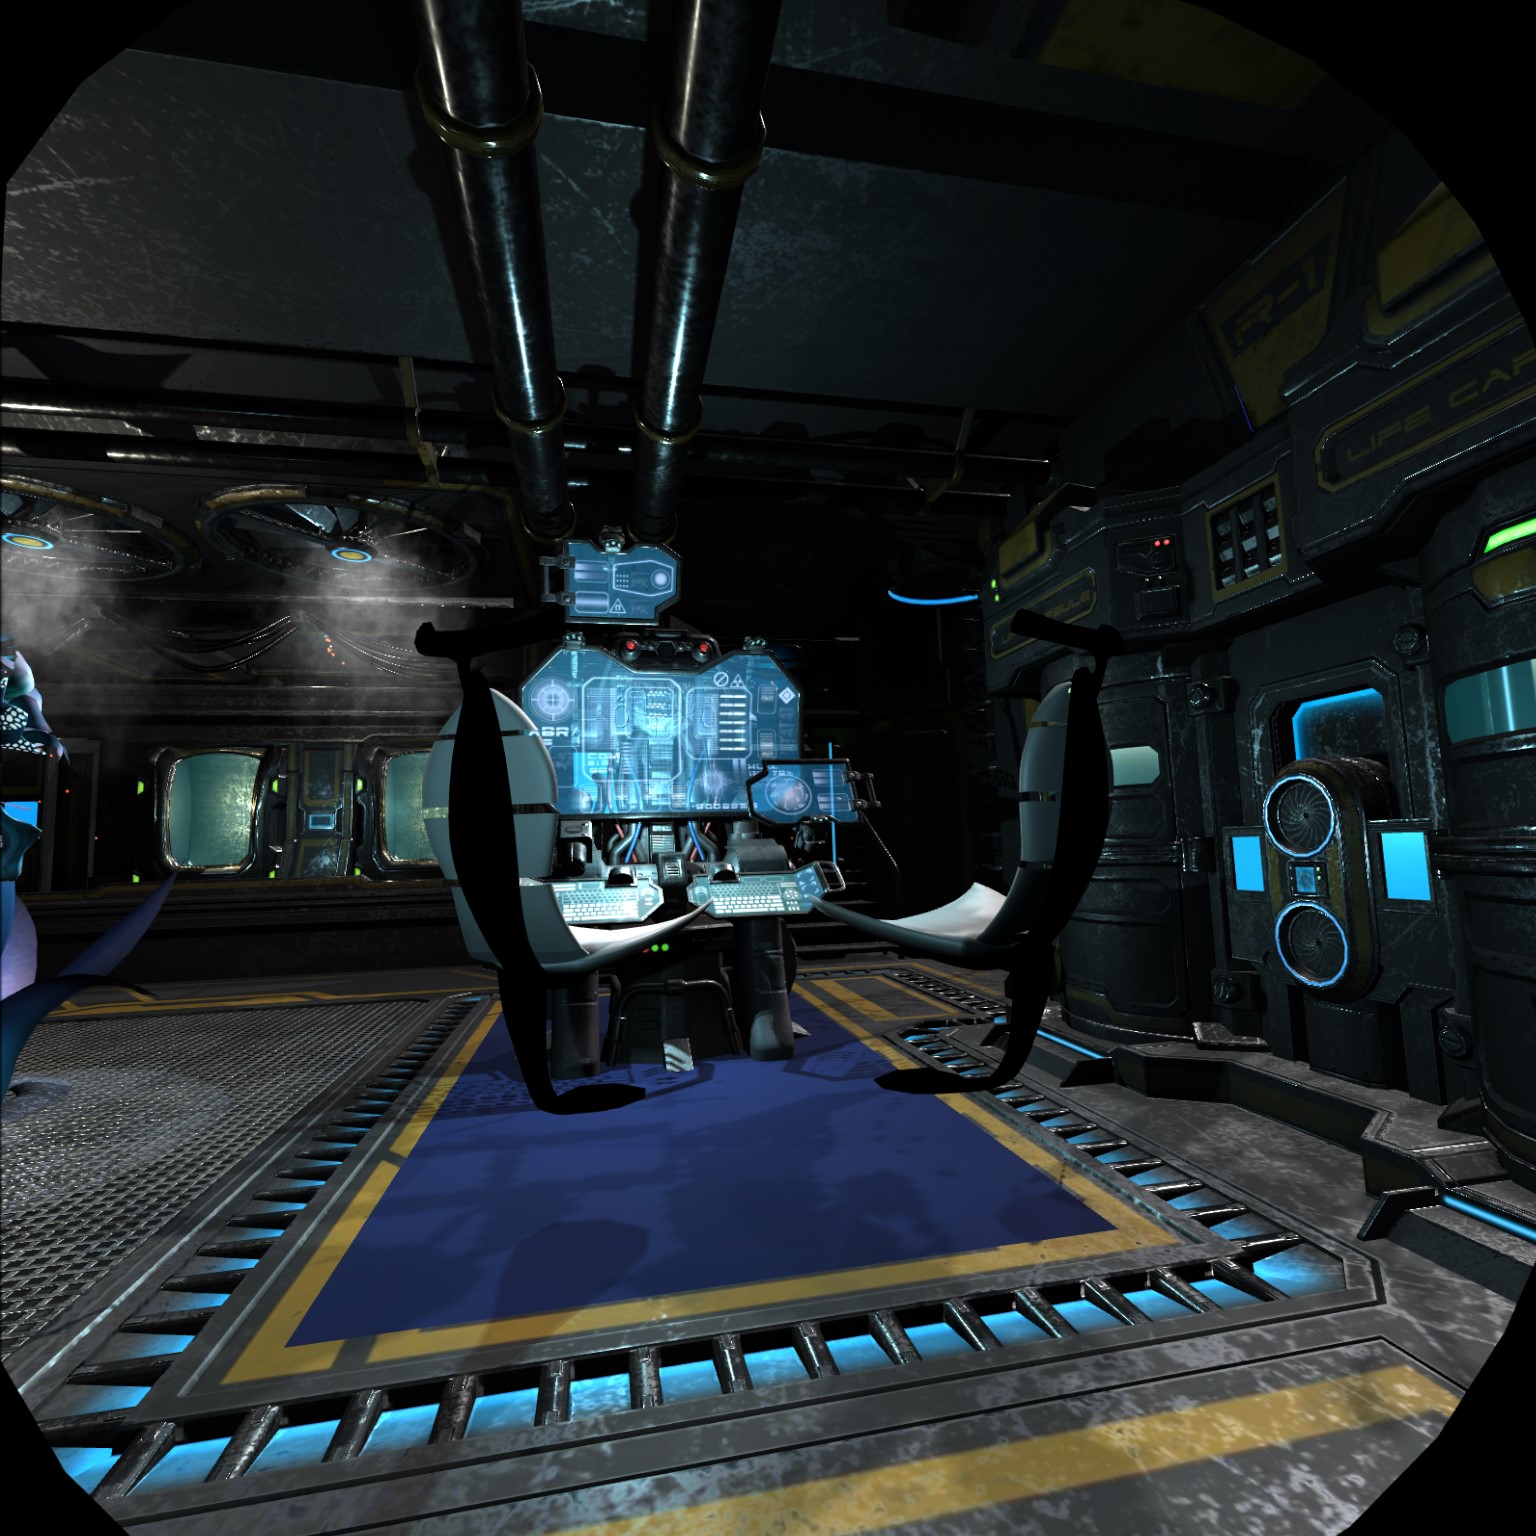 Quest Room Photo 1: Prototype of a room where technologies transport users on galaxy quests.